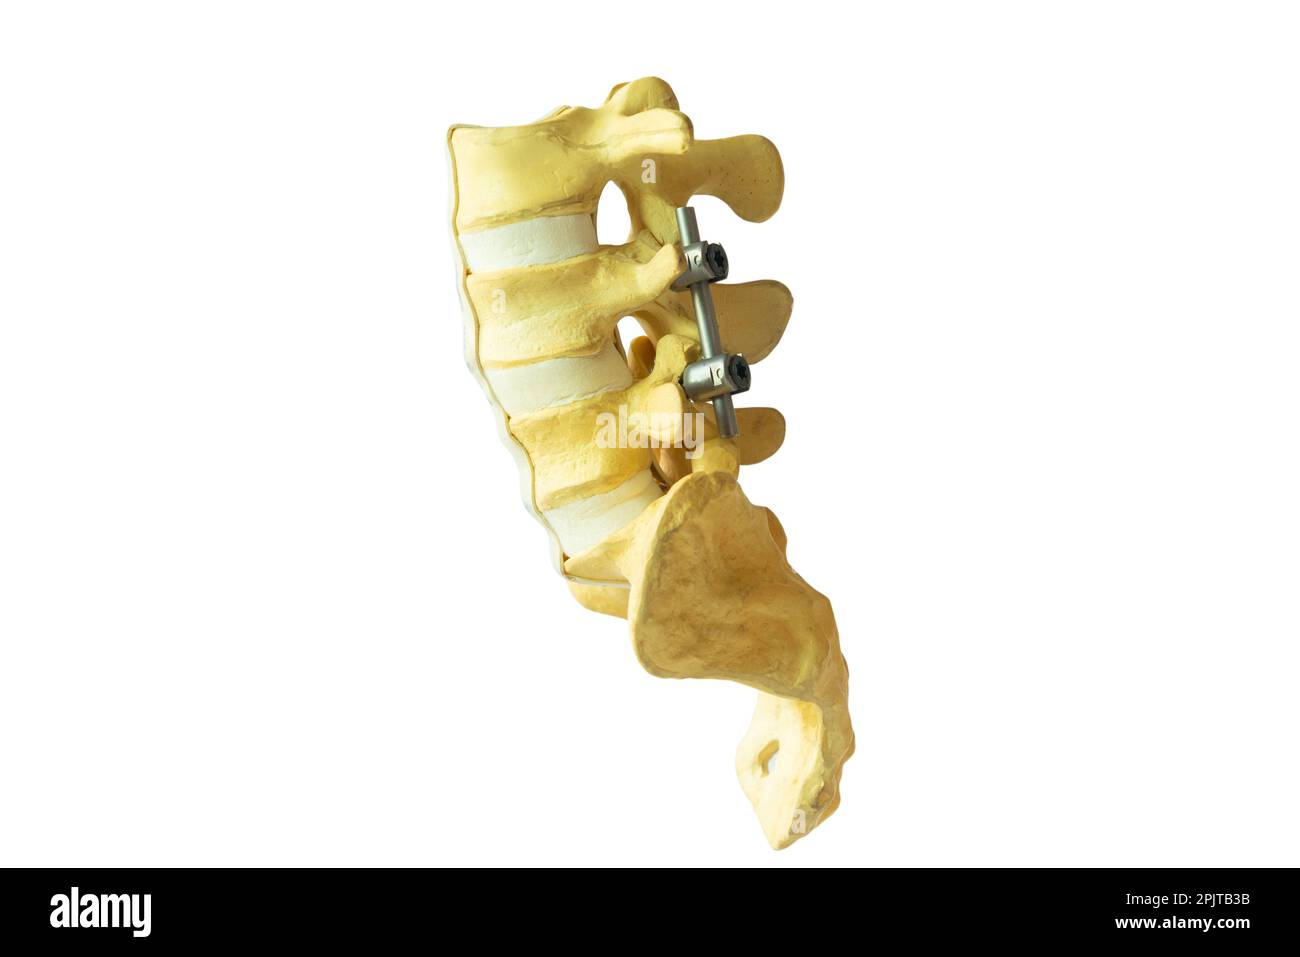 Lateral view lumbra spine model with rod and screw instrument fixation isolated on white background. Stock Photo